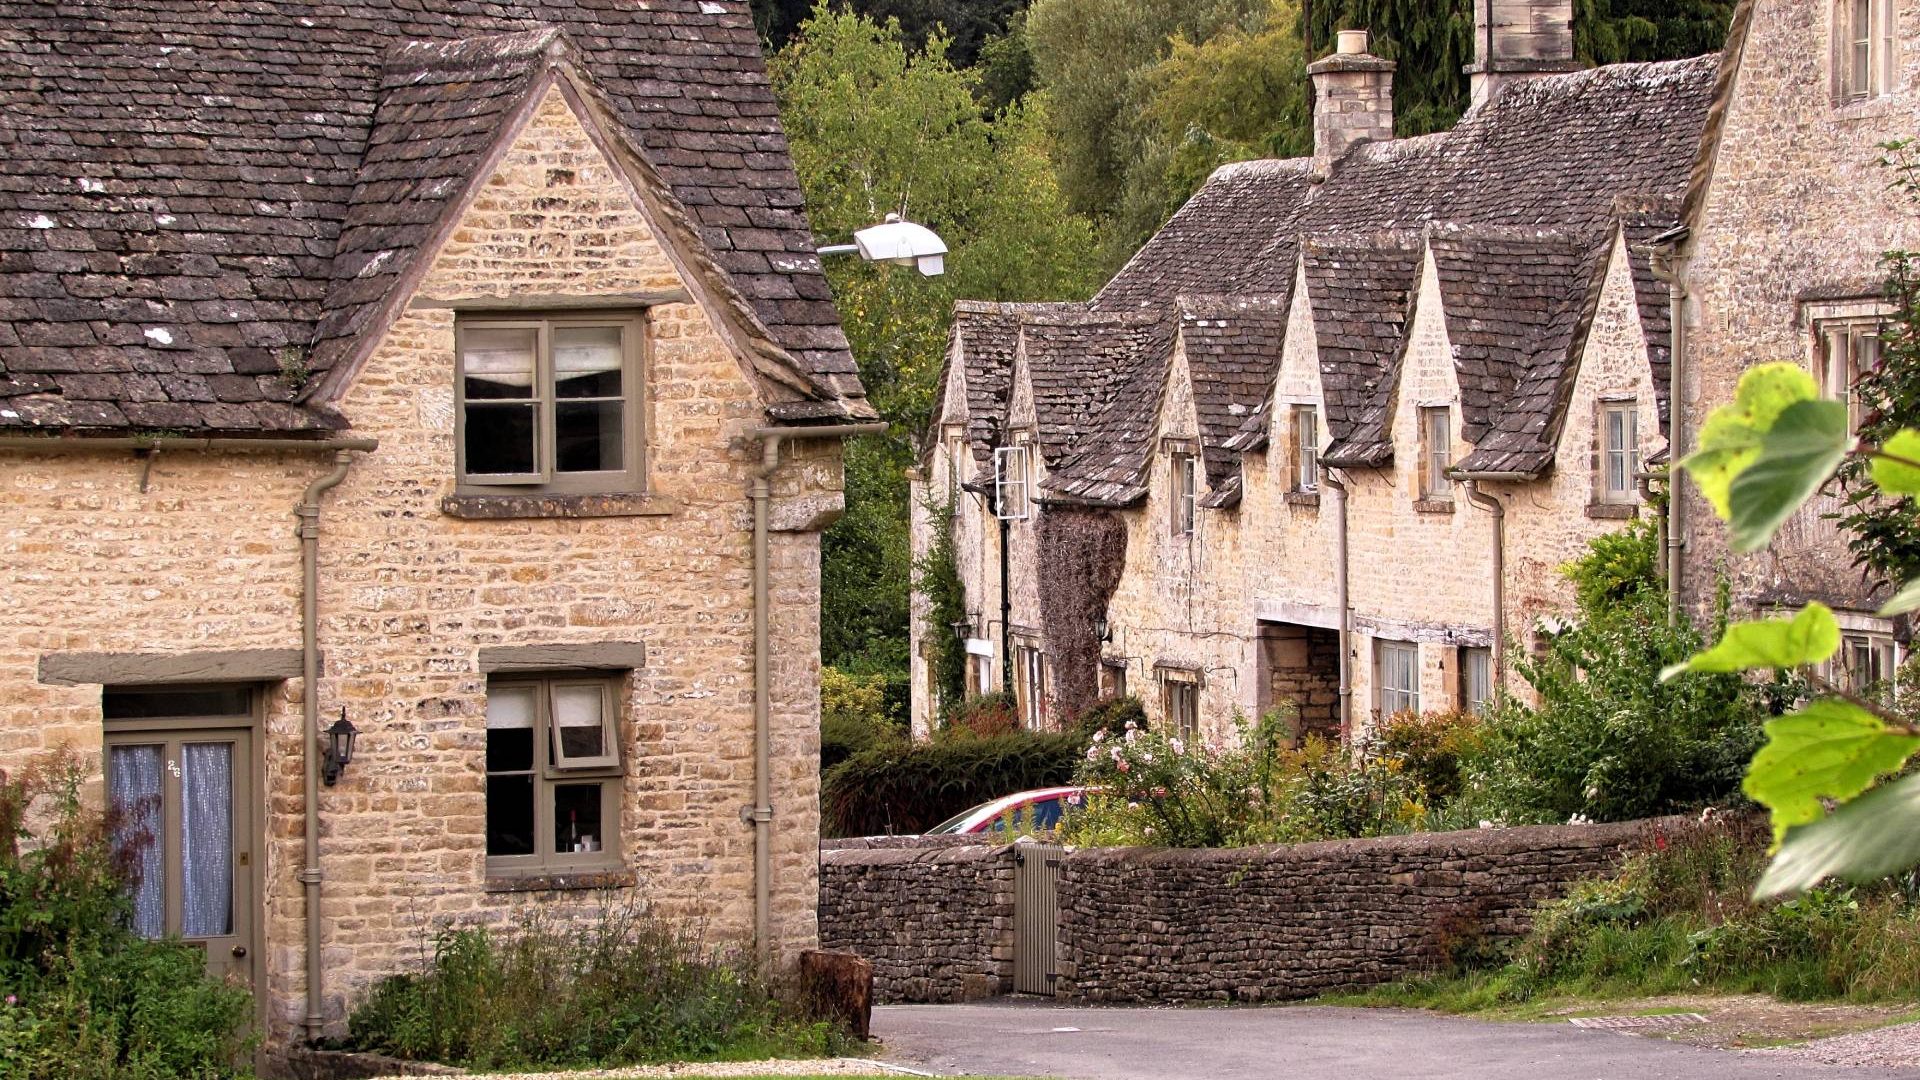 Row of houses in Stow-on-the-Wold Cotswolds